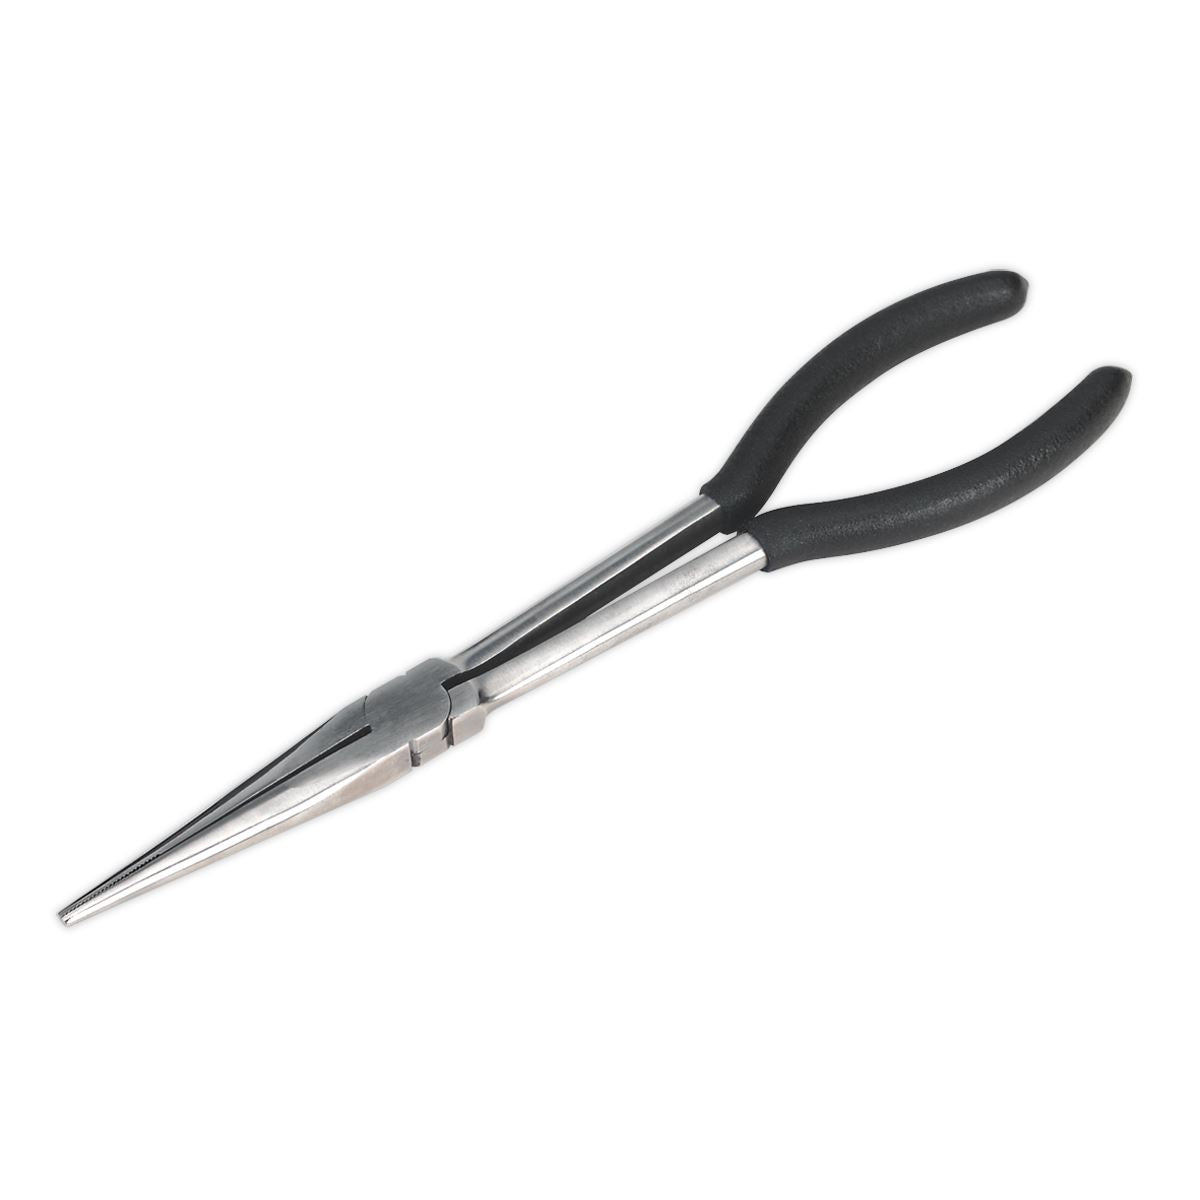 Siegen 280mm Straight Needle Nose Pliers Cushion Grip Handles Polished Finish